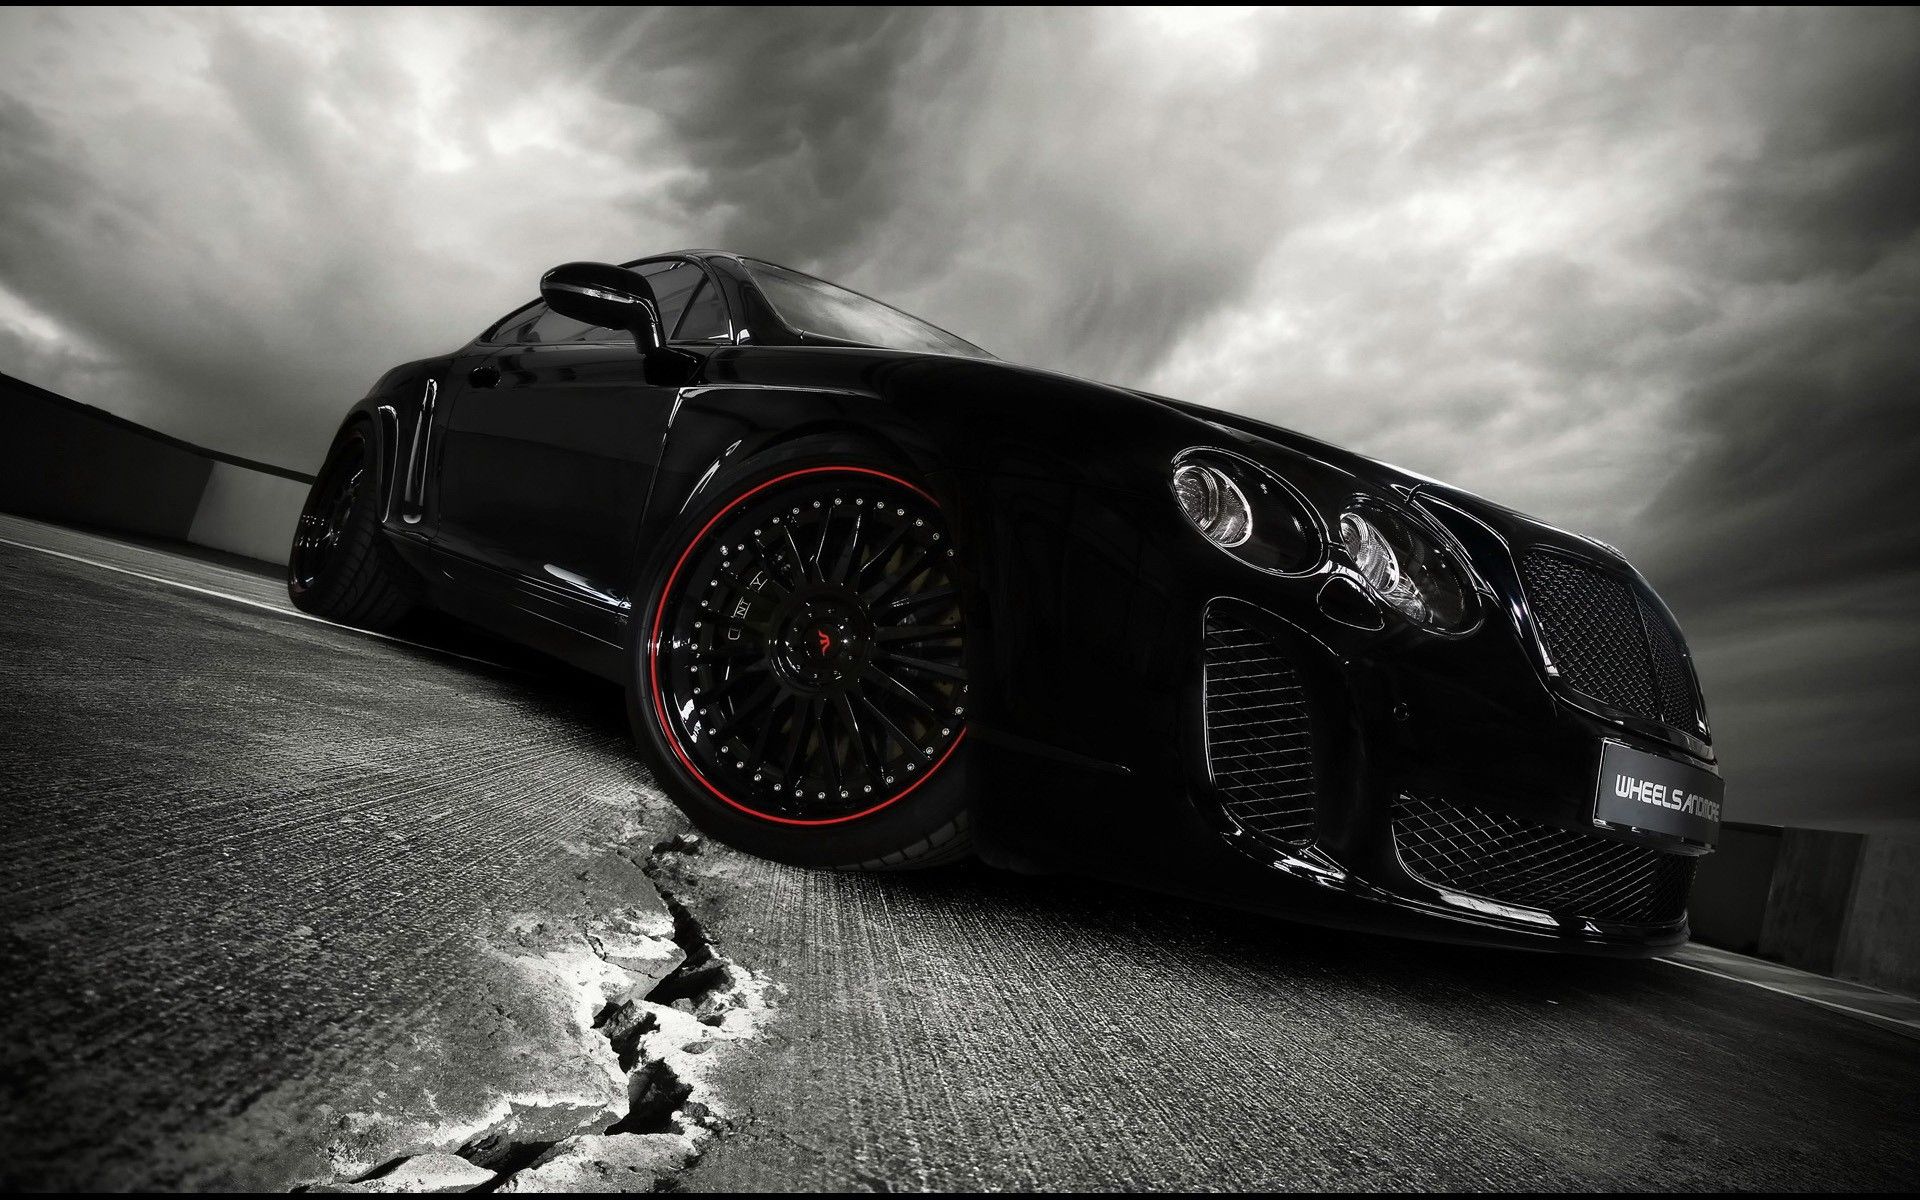 Free download Download the Red and Black Bentley Wallpaper Red and Black [1920x1200] for your Desktop, Mobile & Tablet. Explore Red Bentley Wallpaper. Red Bentley Wallpaper, Bentley Wallpaper, Bentley Cars Wallpaper